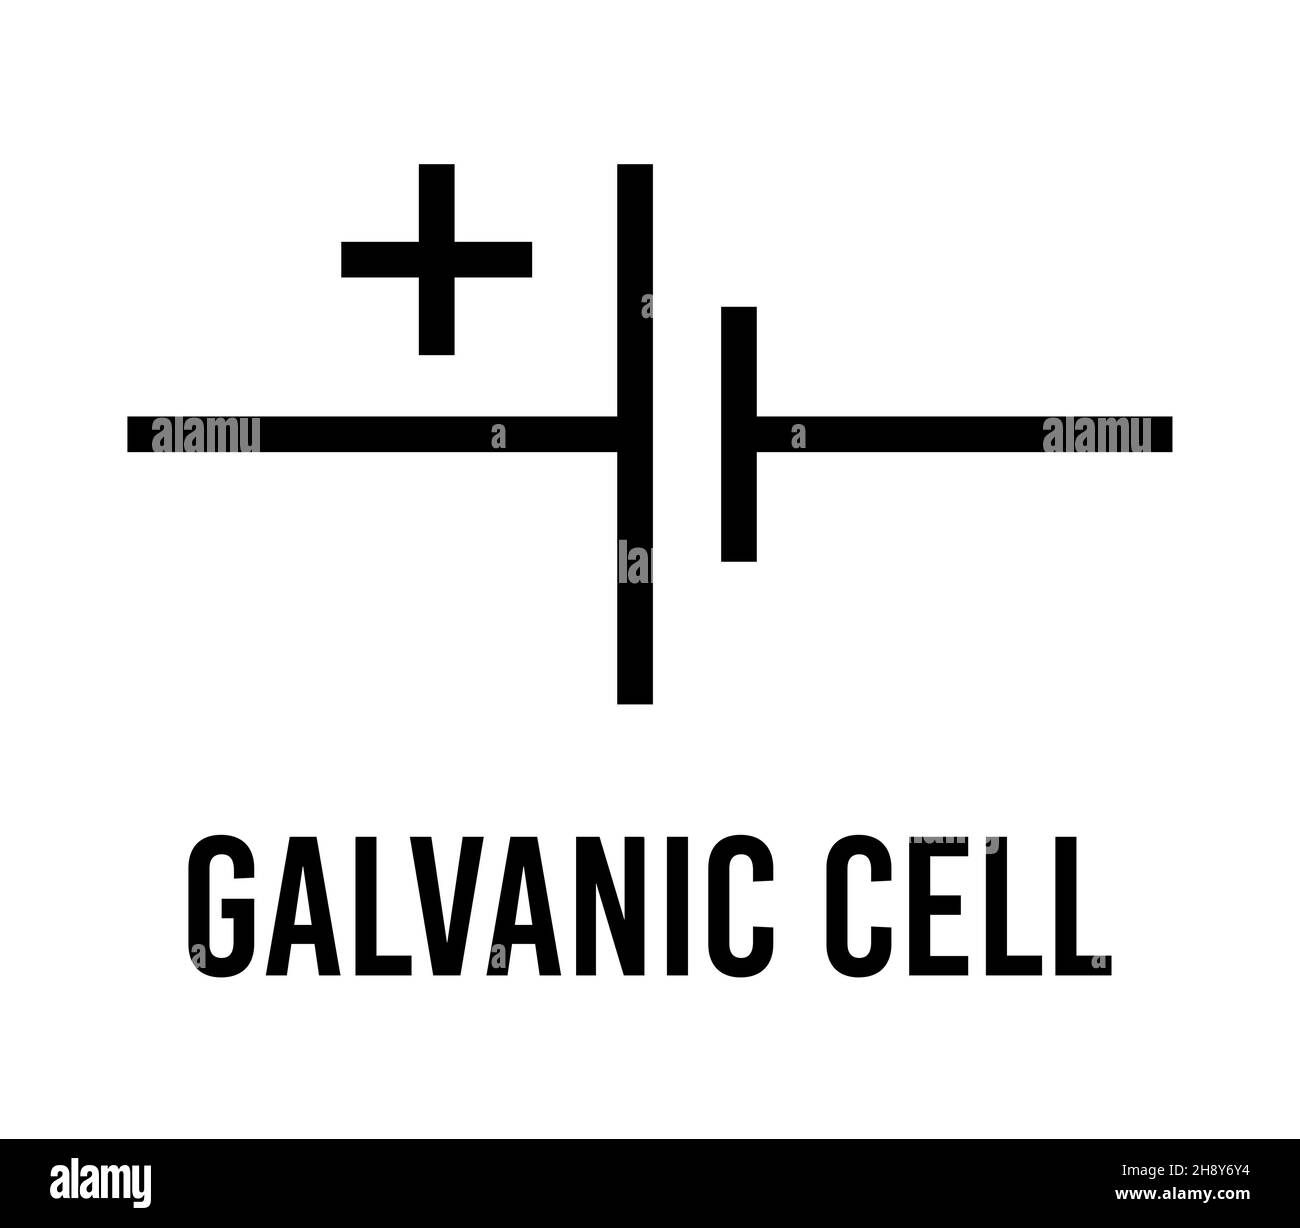 Galvanic cell electronic component, vector icon flat design concept. Electricity physics scheme for education. Black on white background. Stock Vector